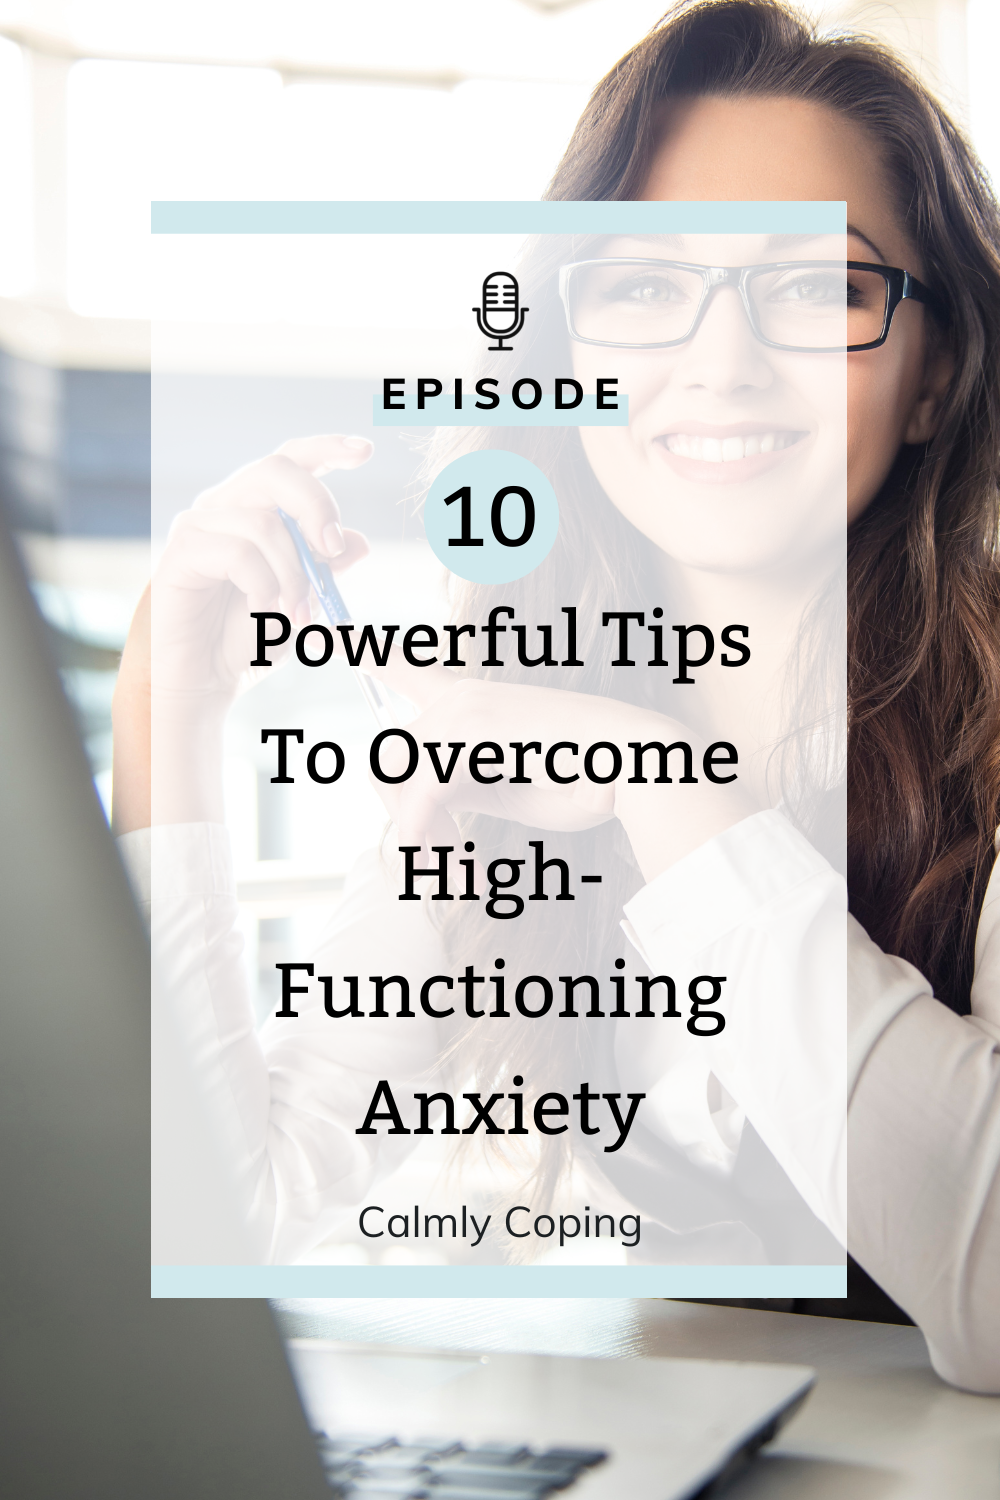 10 Powerful Tips To Overcome High-Functioning Anxiety